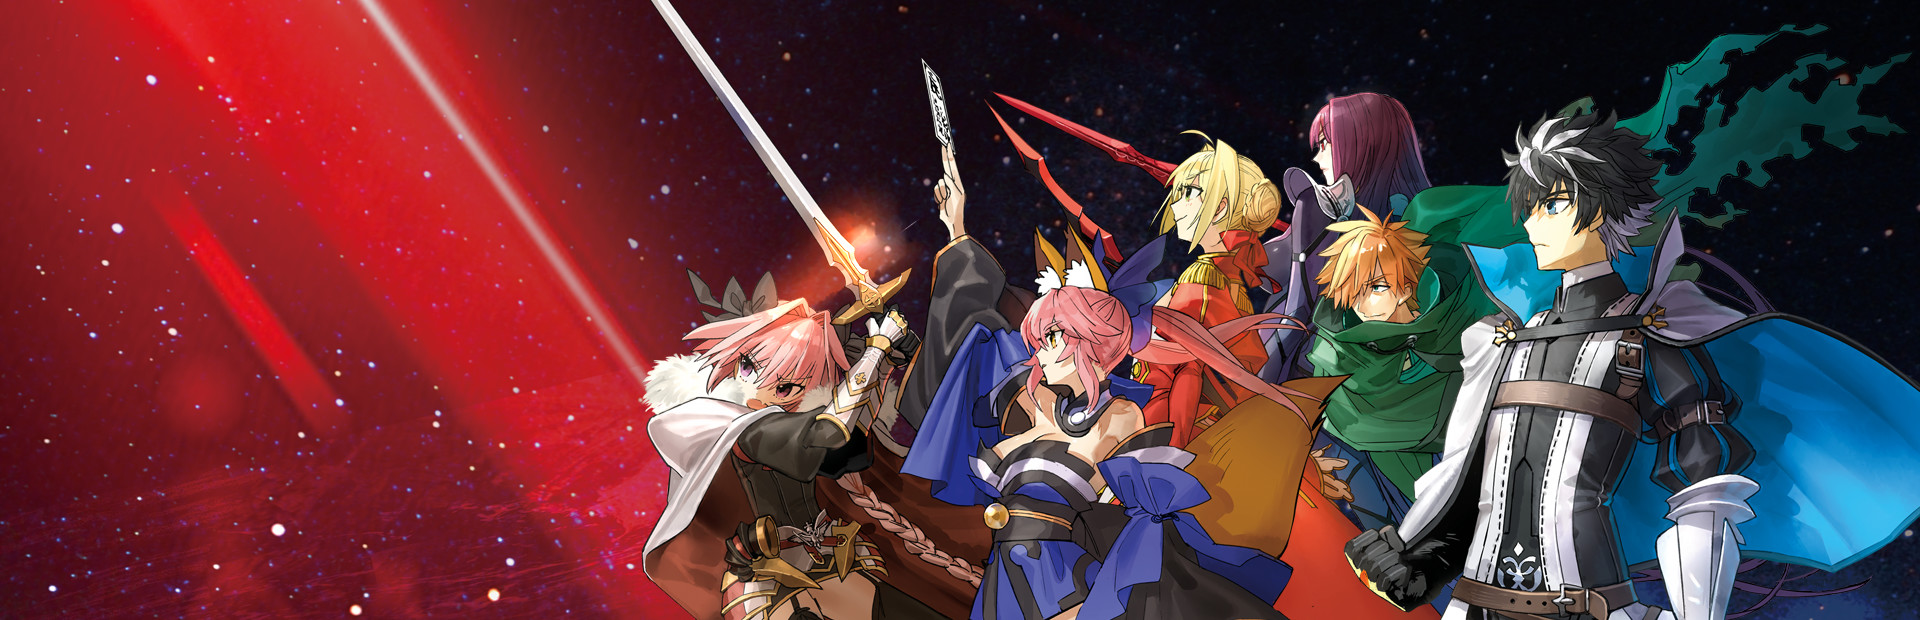 Fate/EXTELLA LINK cover image